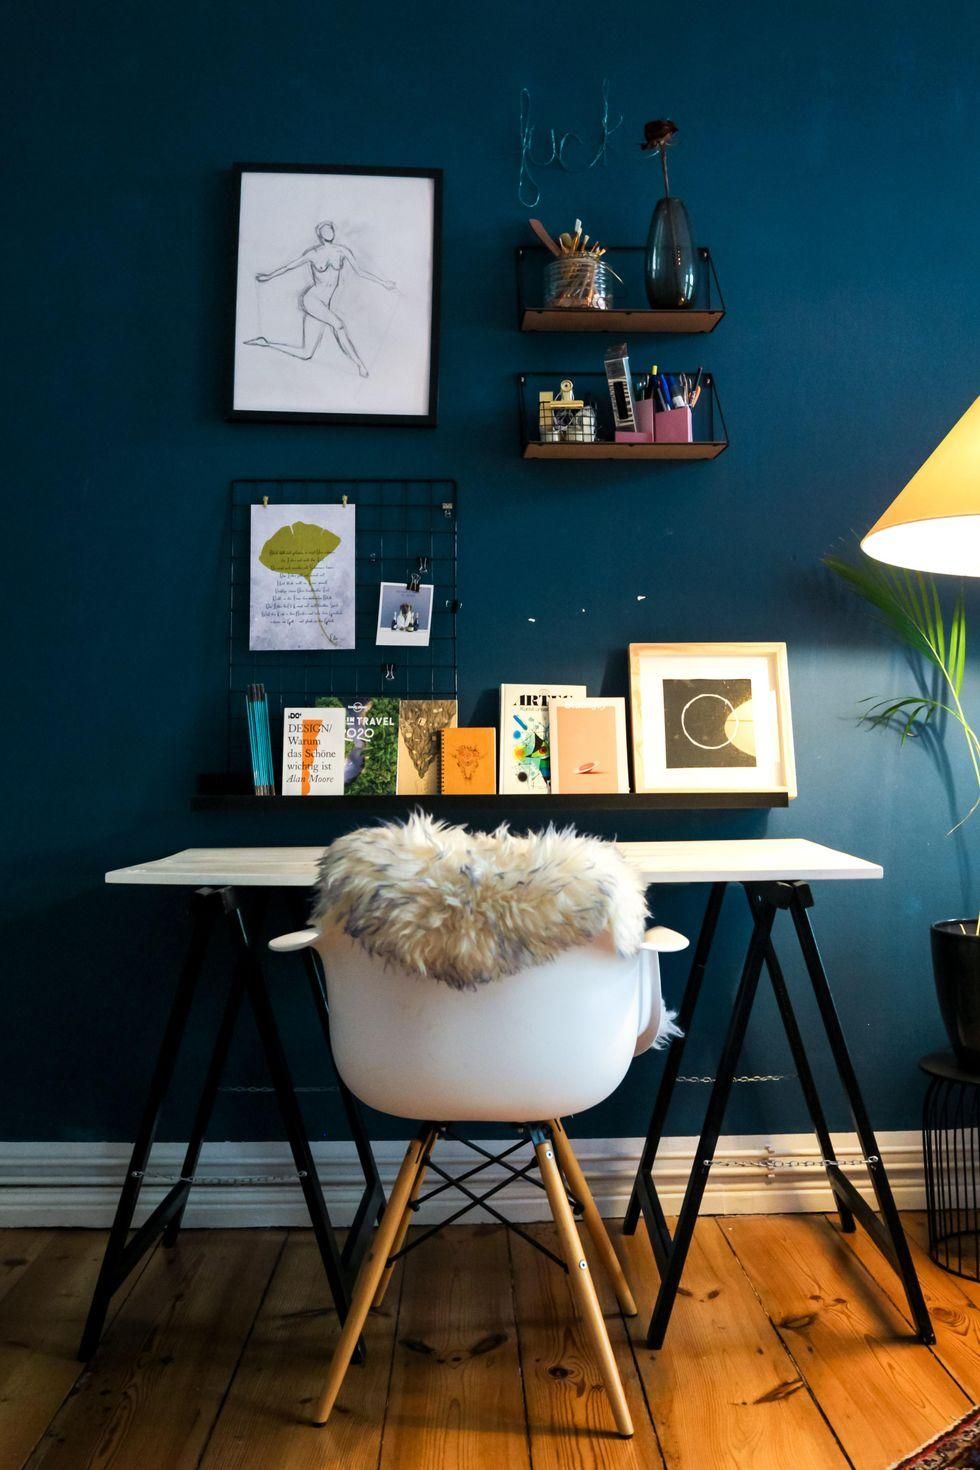 25 Office Decor Ideas from Instagram For Anyone Working From Home